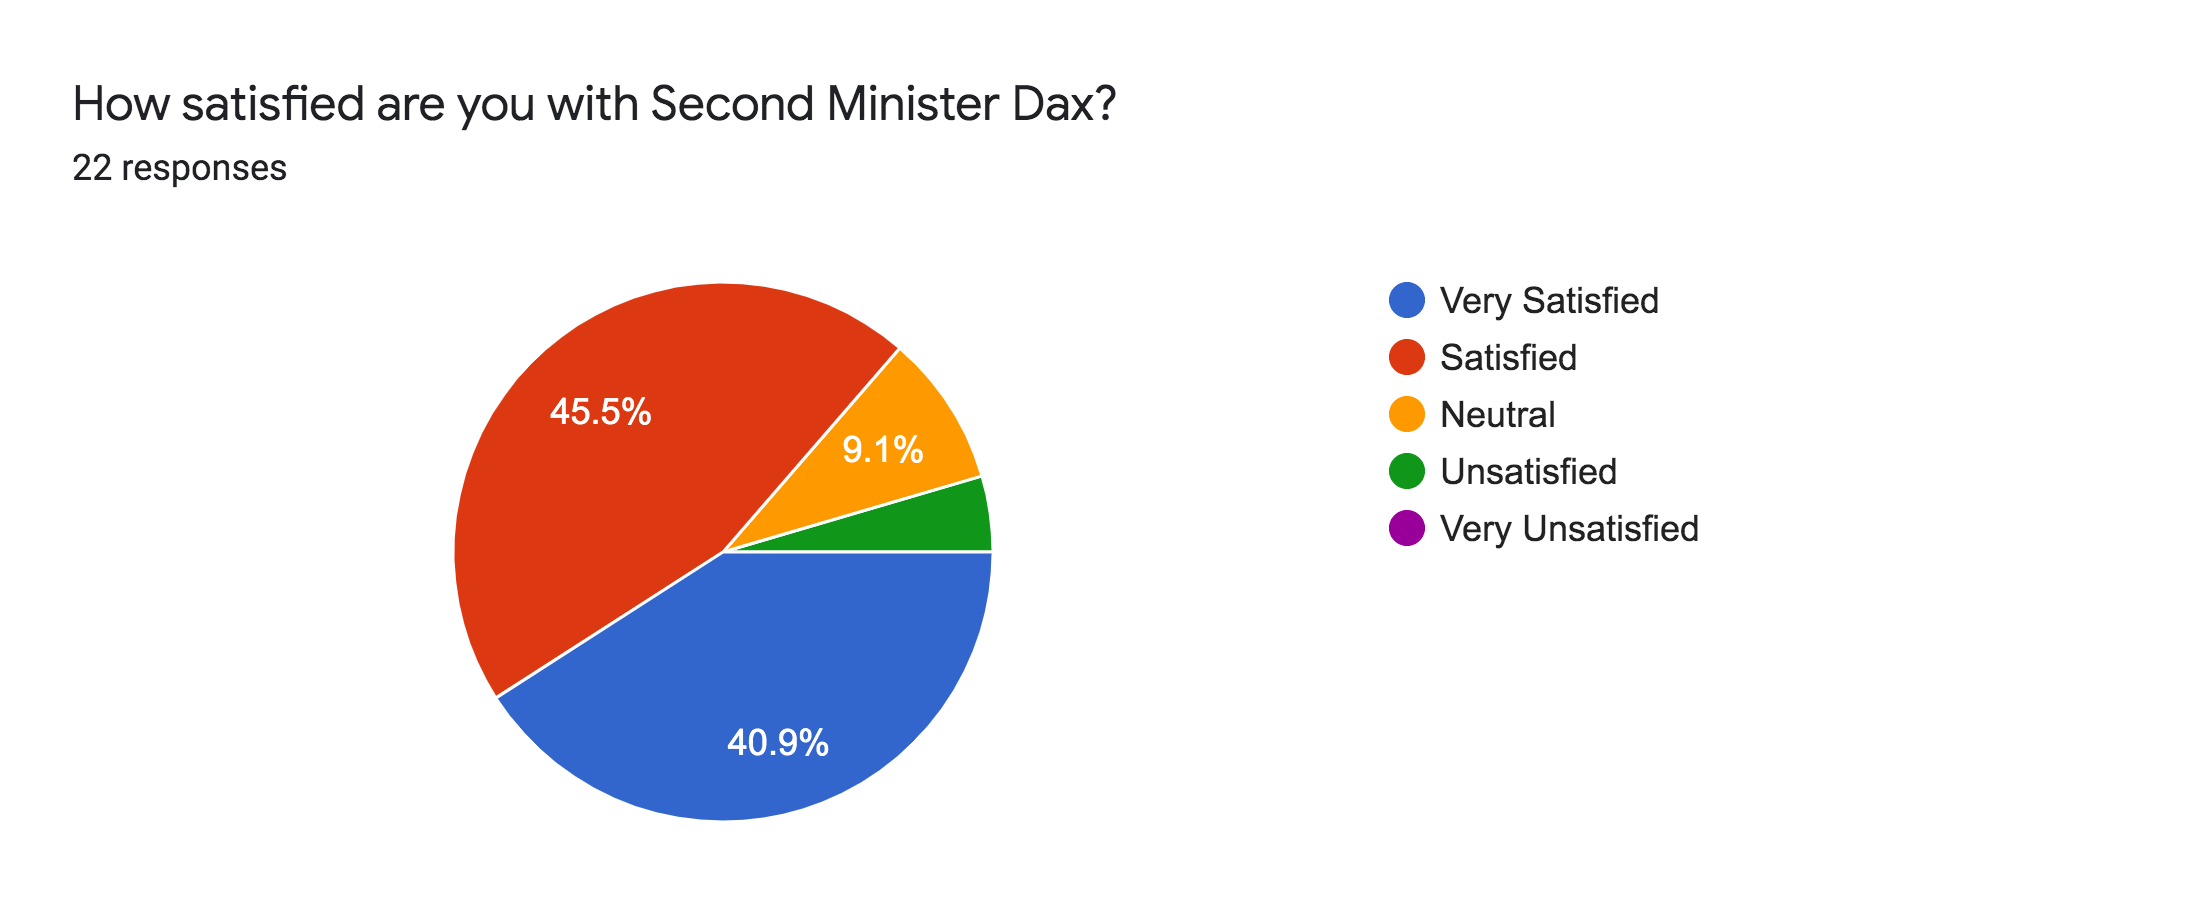 Forms response chart. Question title: How satisfied are you with Second Minister Dax?. Number of responses: 22 responses.